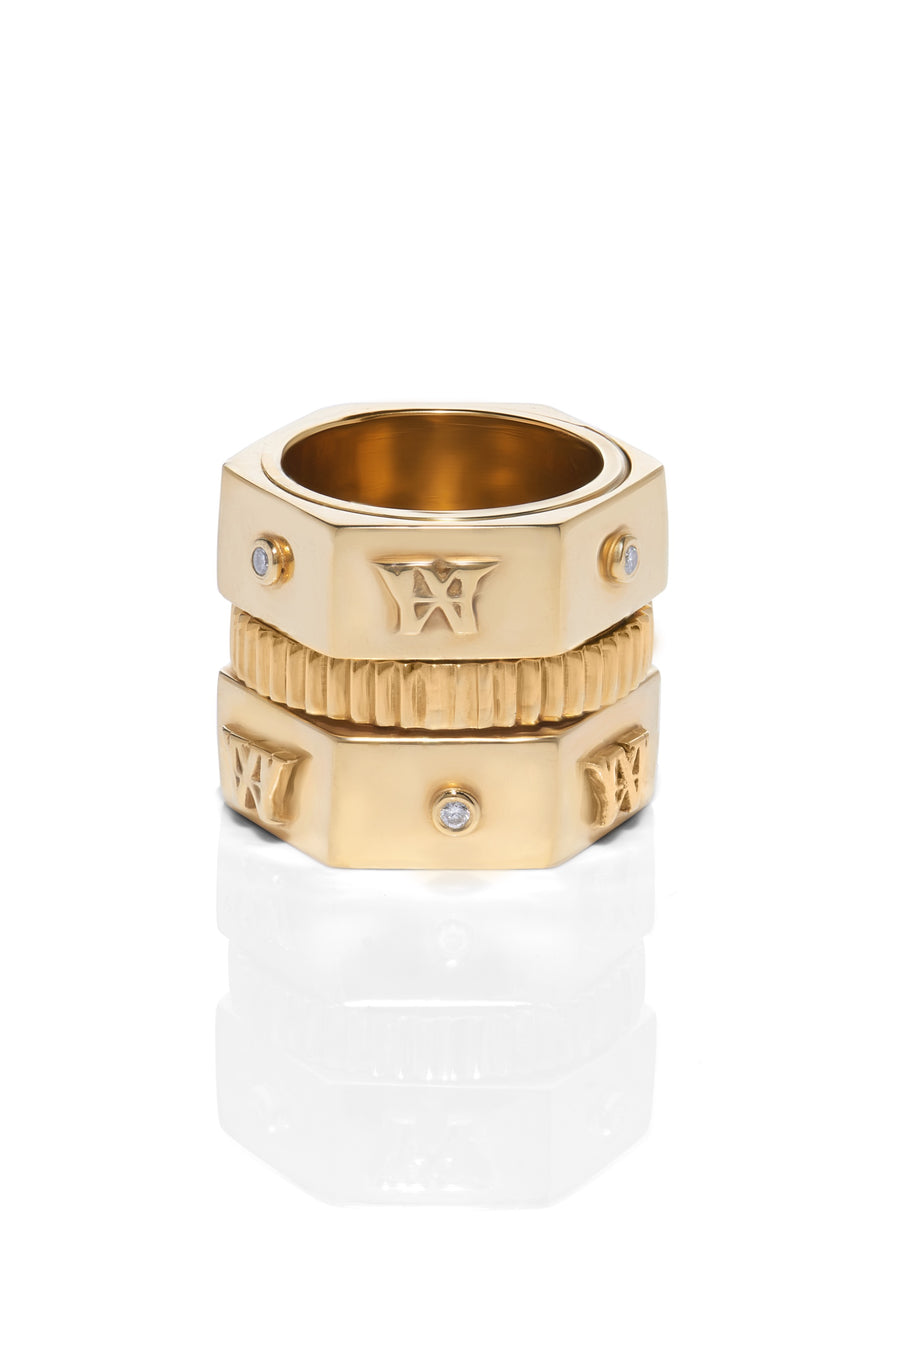 Buy Bridechilla Stackable Rings In Gold Plated 925 Silver (Set Of 3) from  Shaya by CaratLane